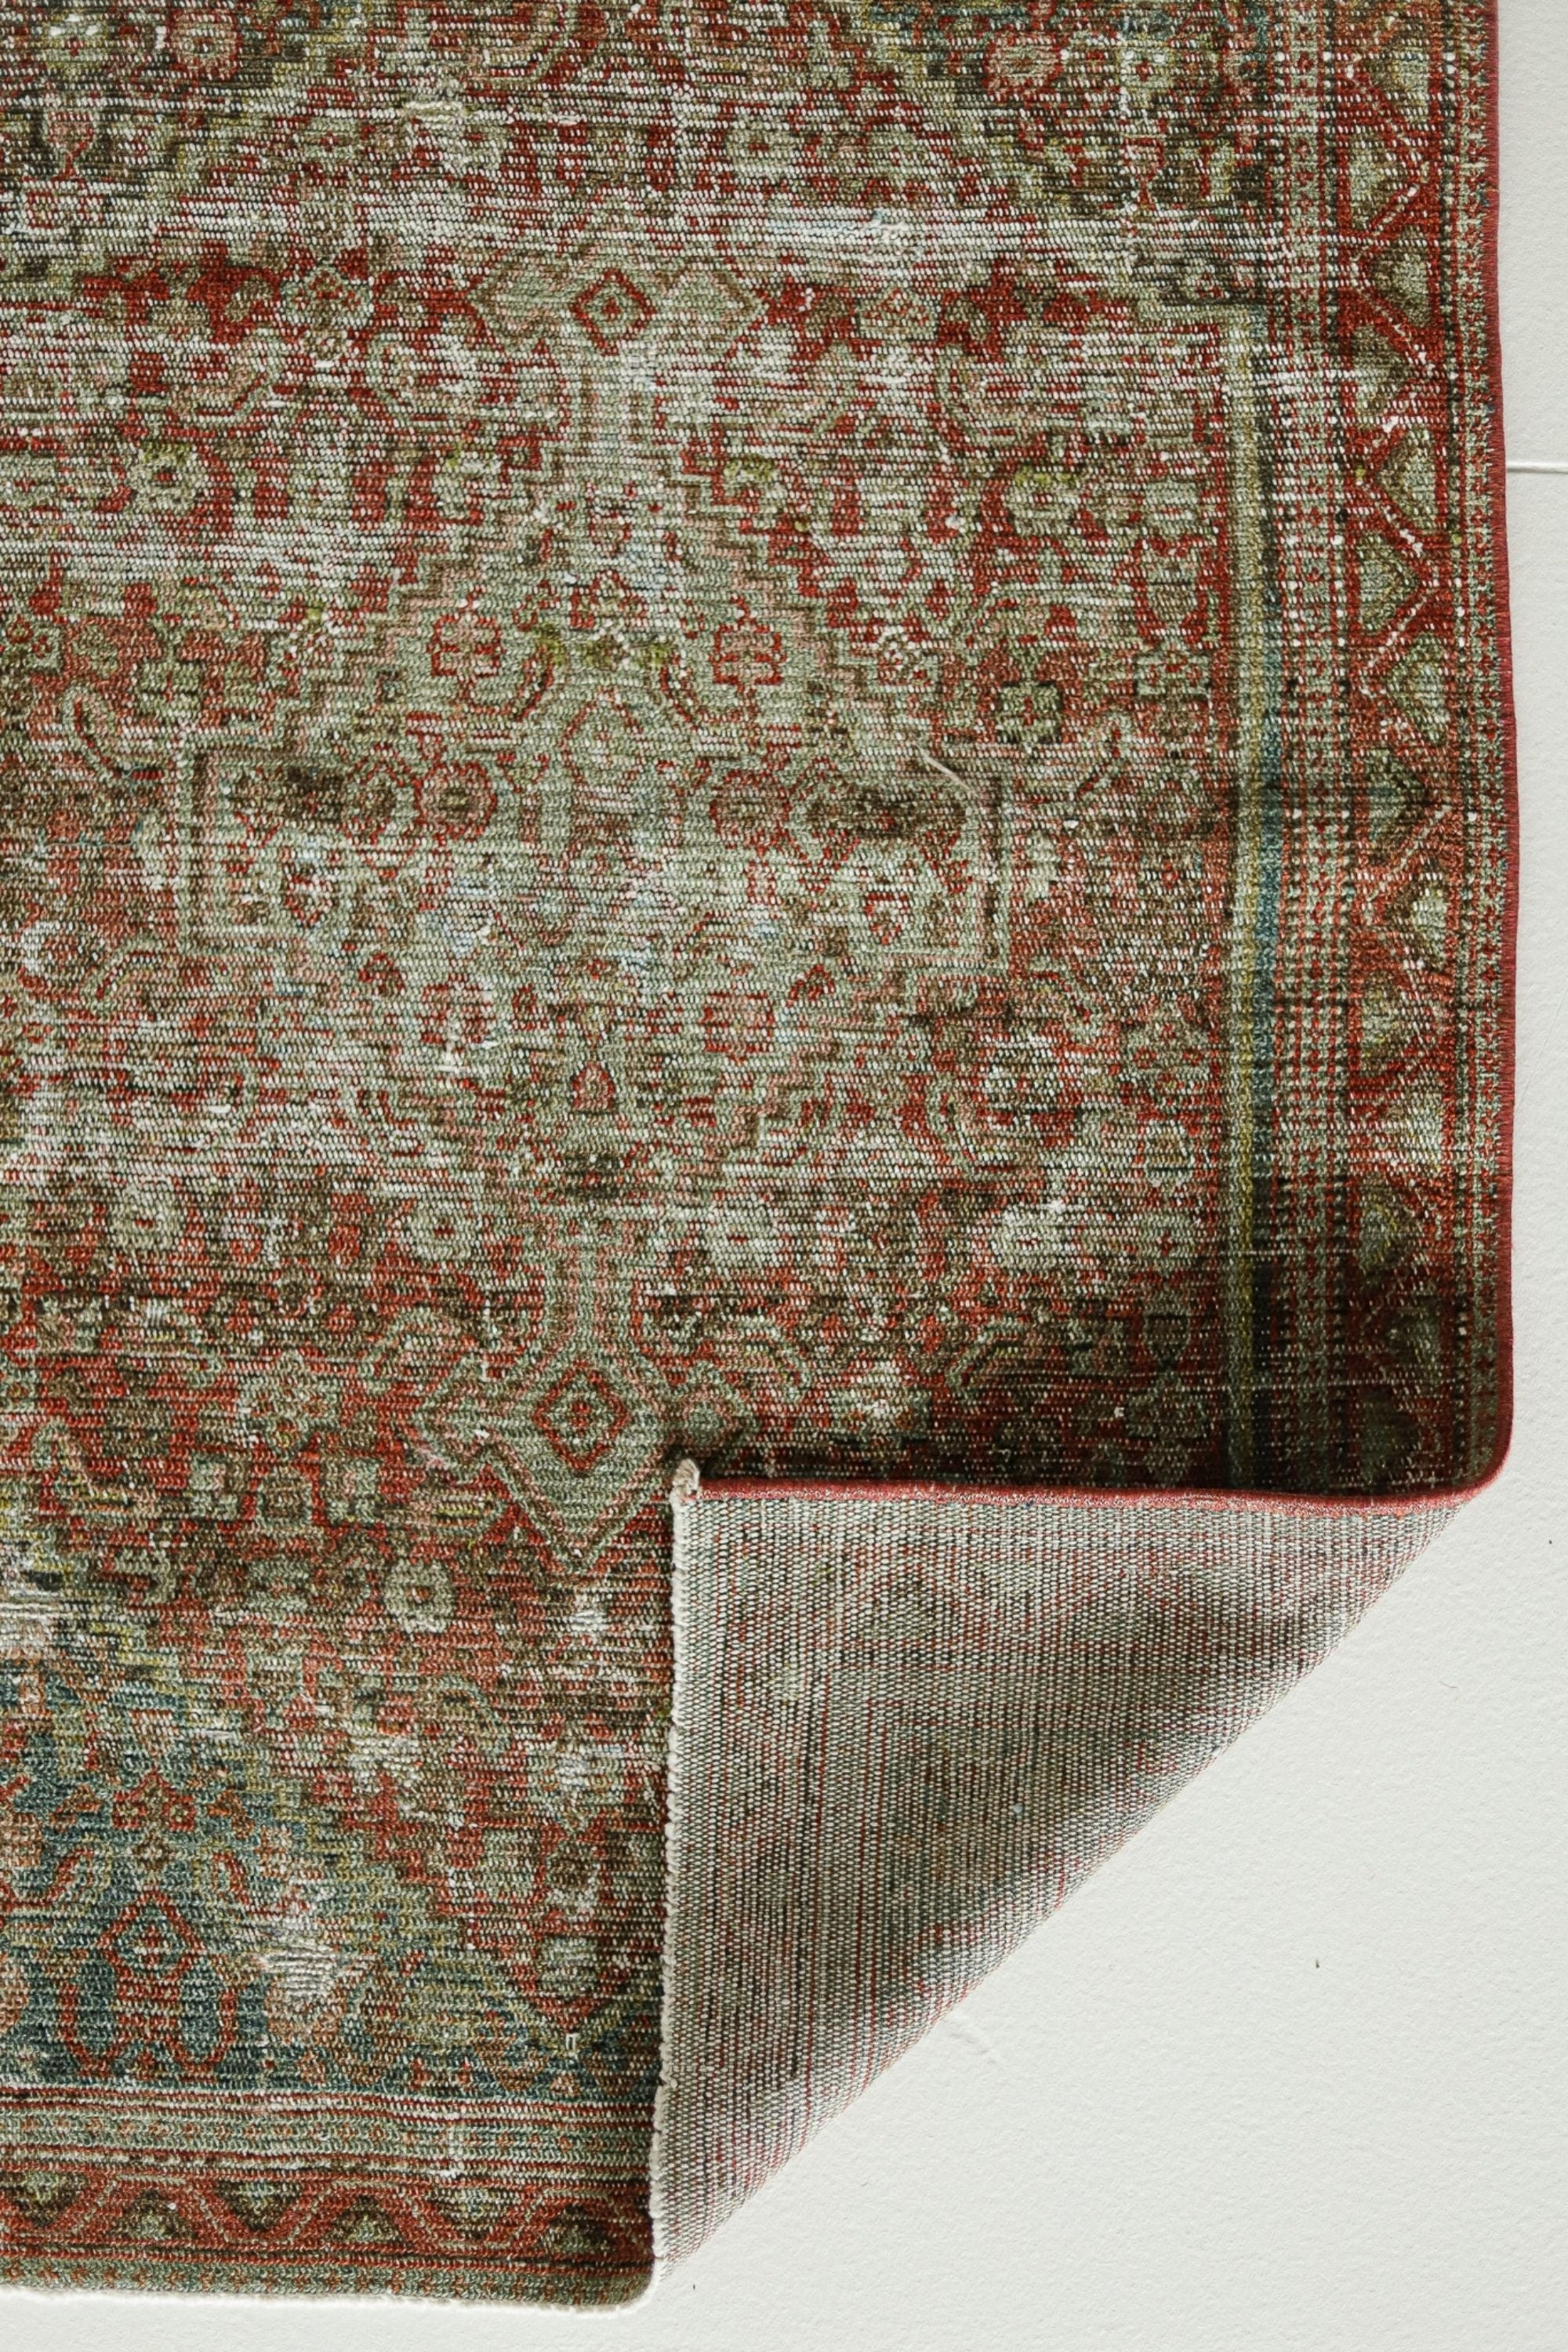 a rug with a red and green design on it